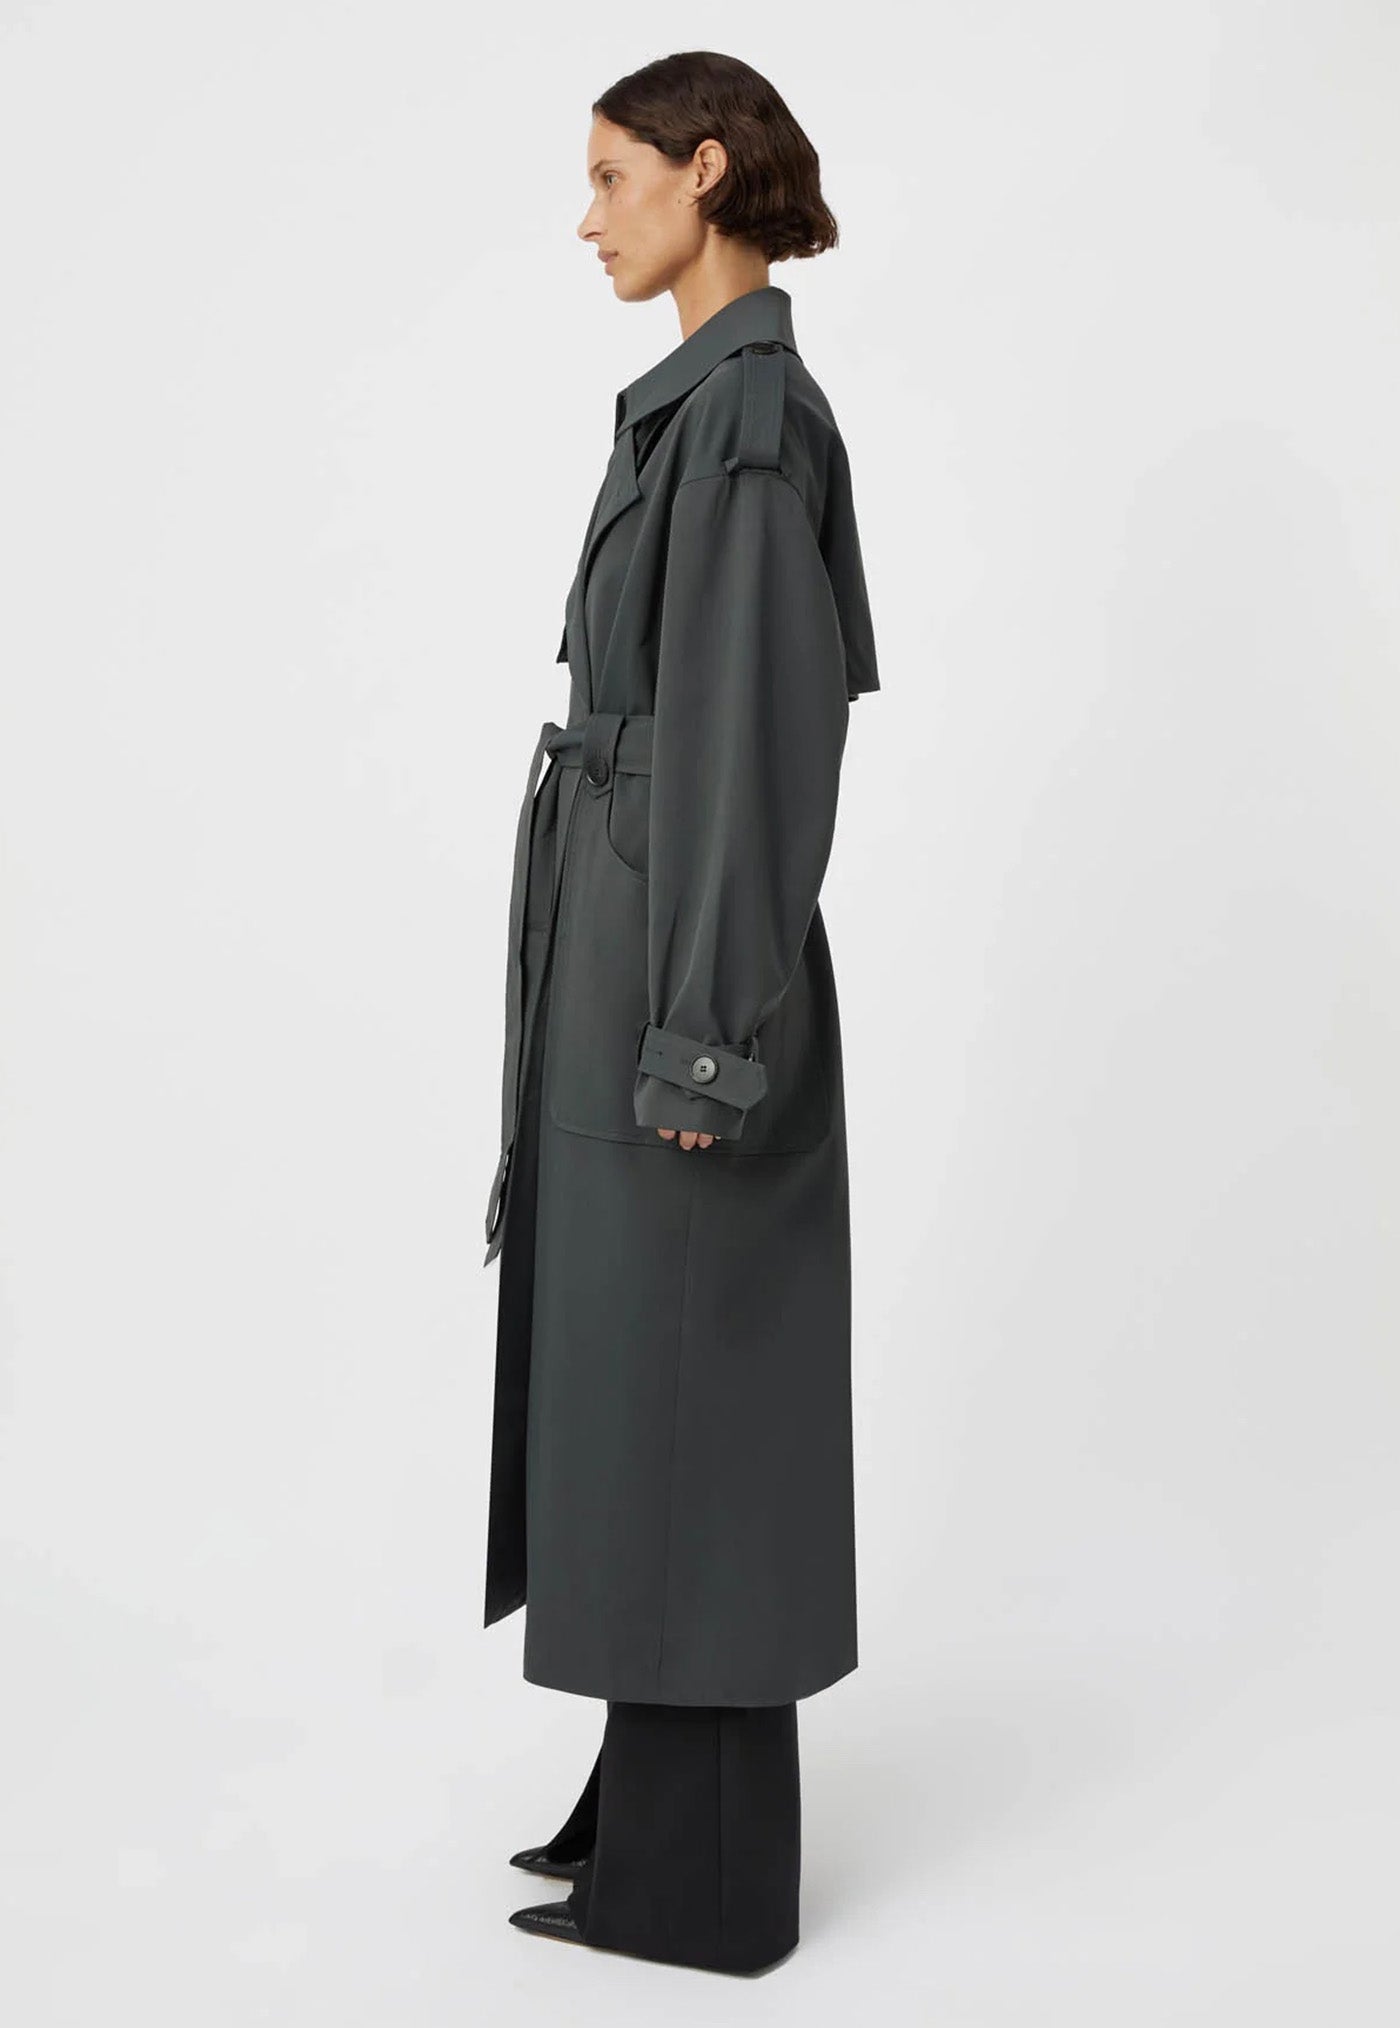 Reyes Trench Coat - Charcoal sold by Angel Divine